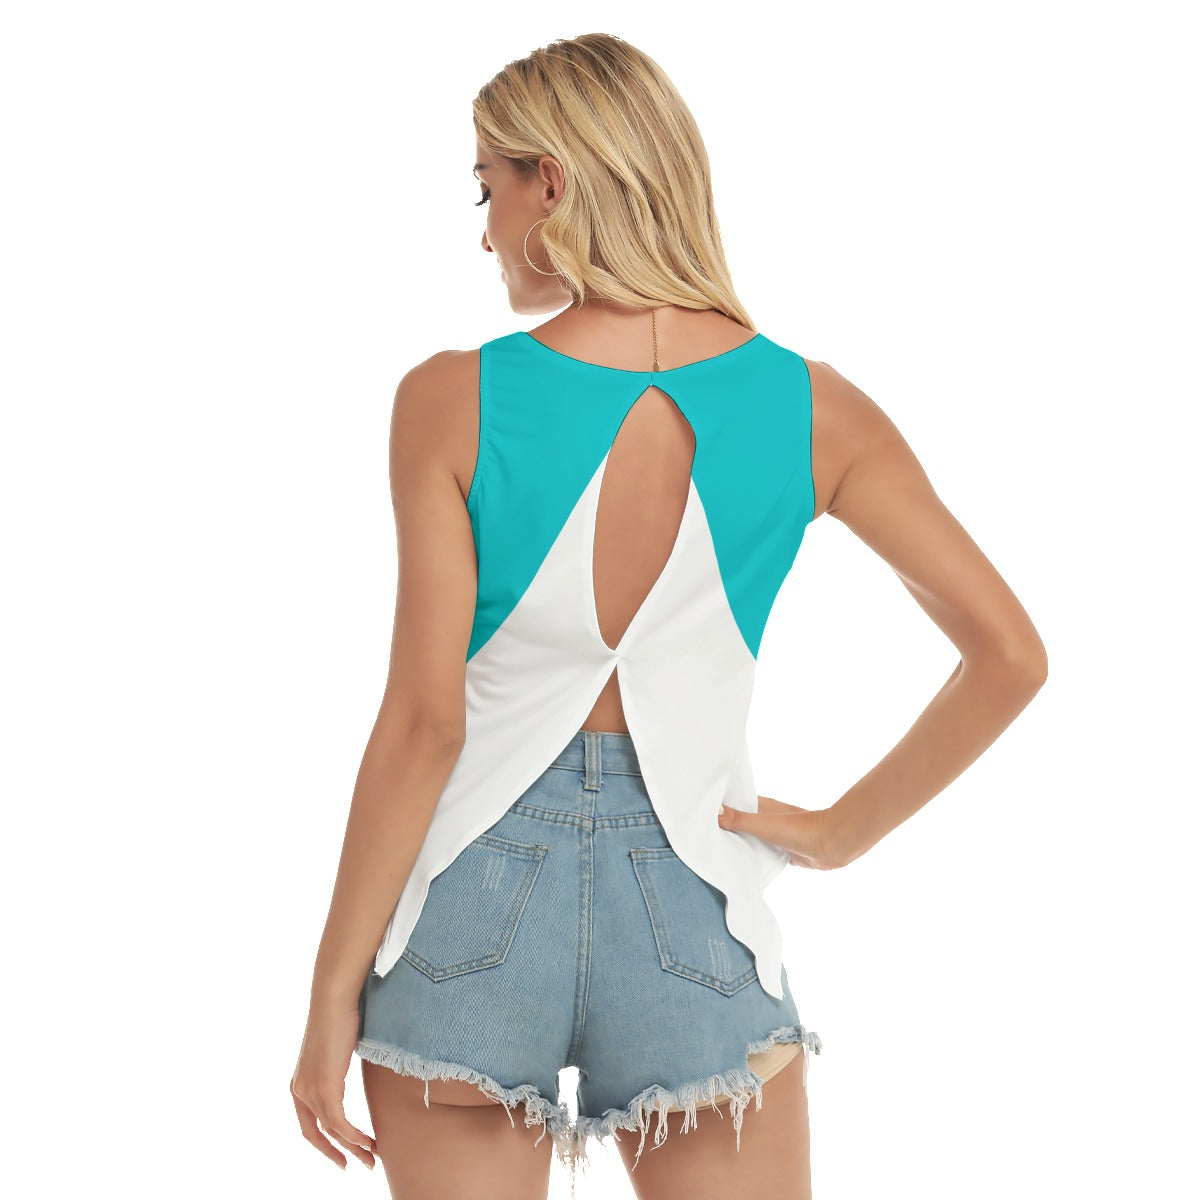 DZY P Classic - Diagonal Pickleball Tank Top by Dizzy Pickle - Cool Teal